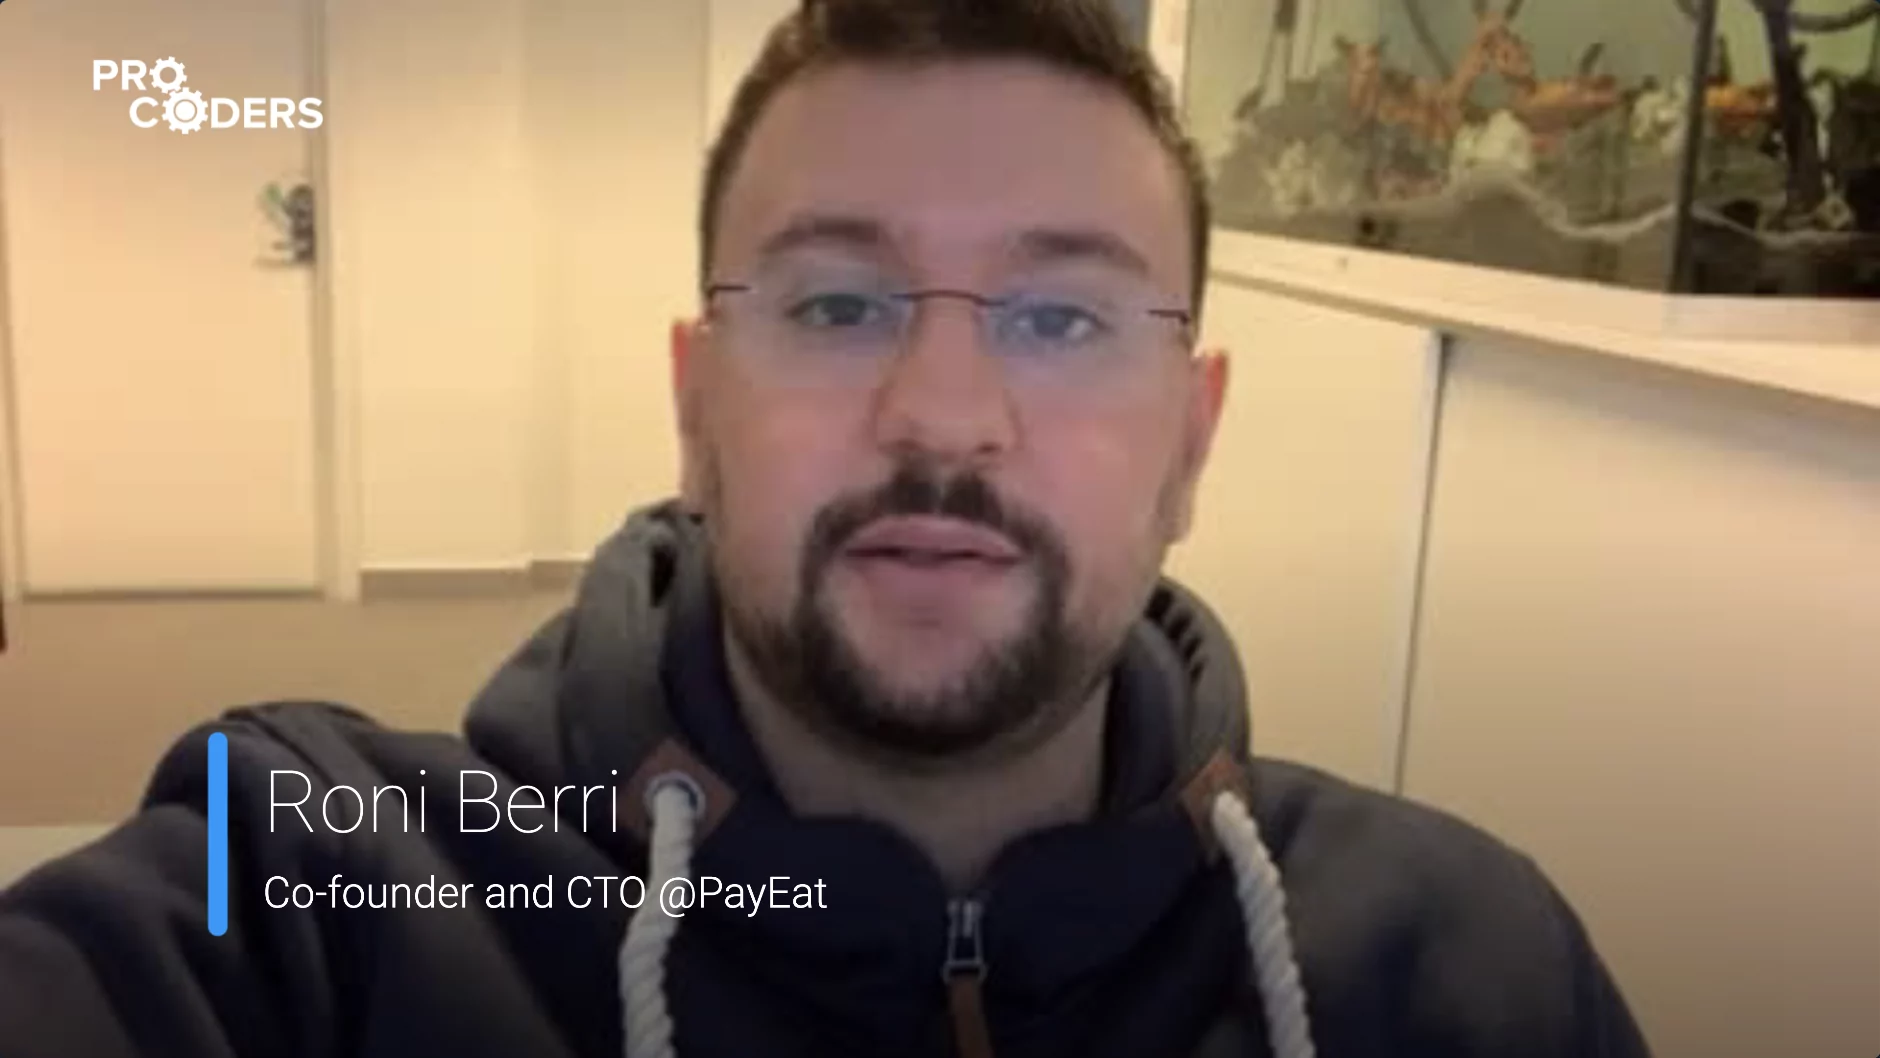 Roni Berri co-founder and CTO @PayEat